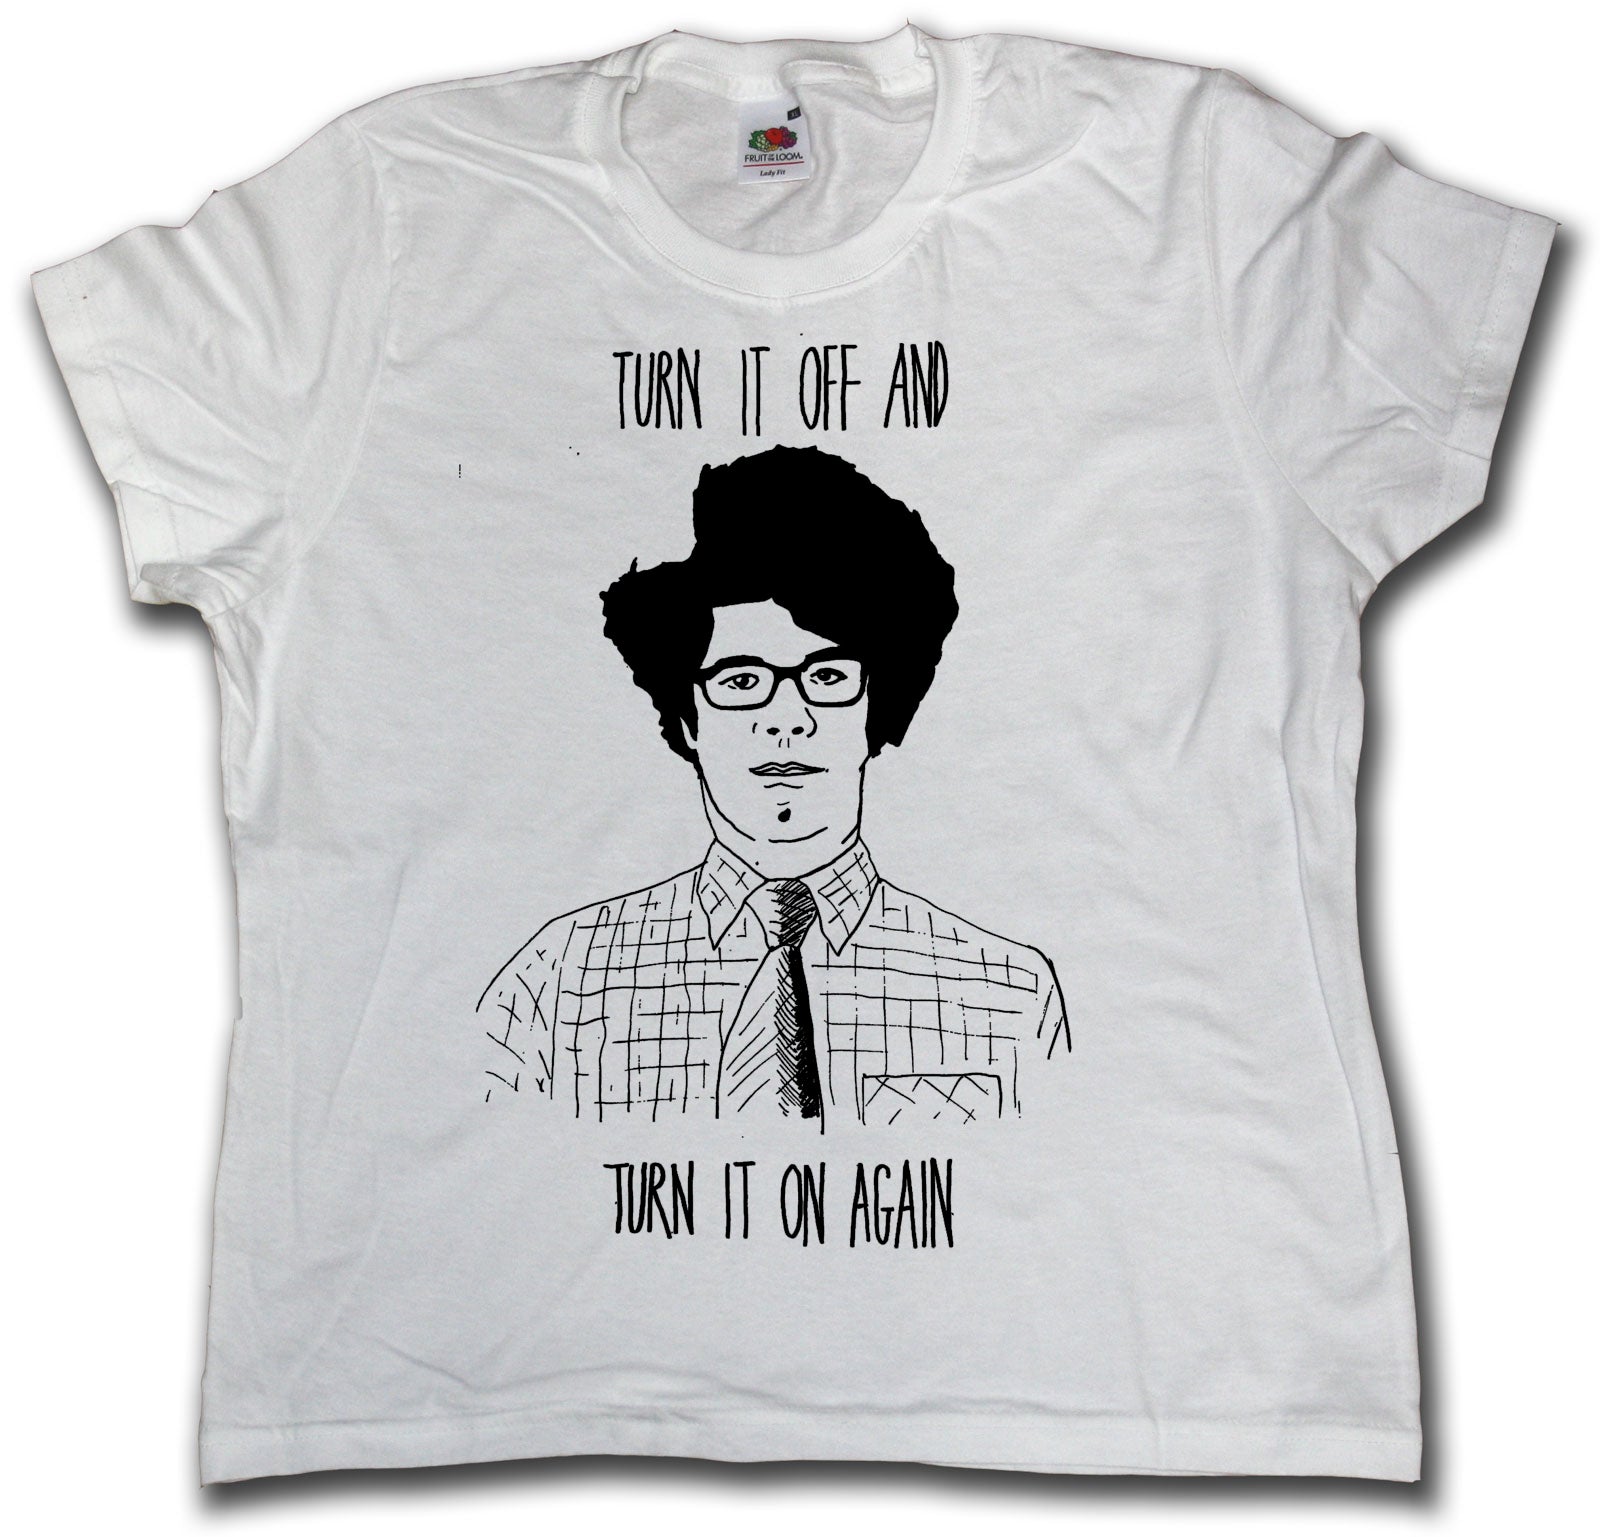 IT Crowd Moss T shirt - Turn It Off And Turn It On Again